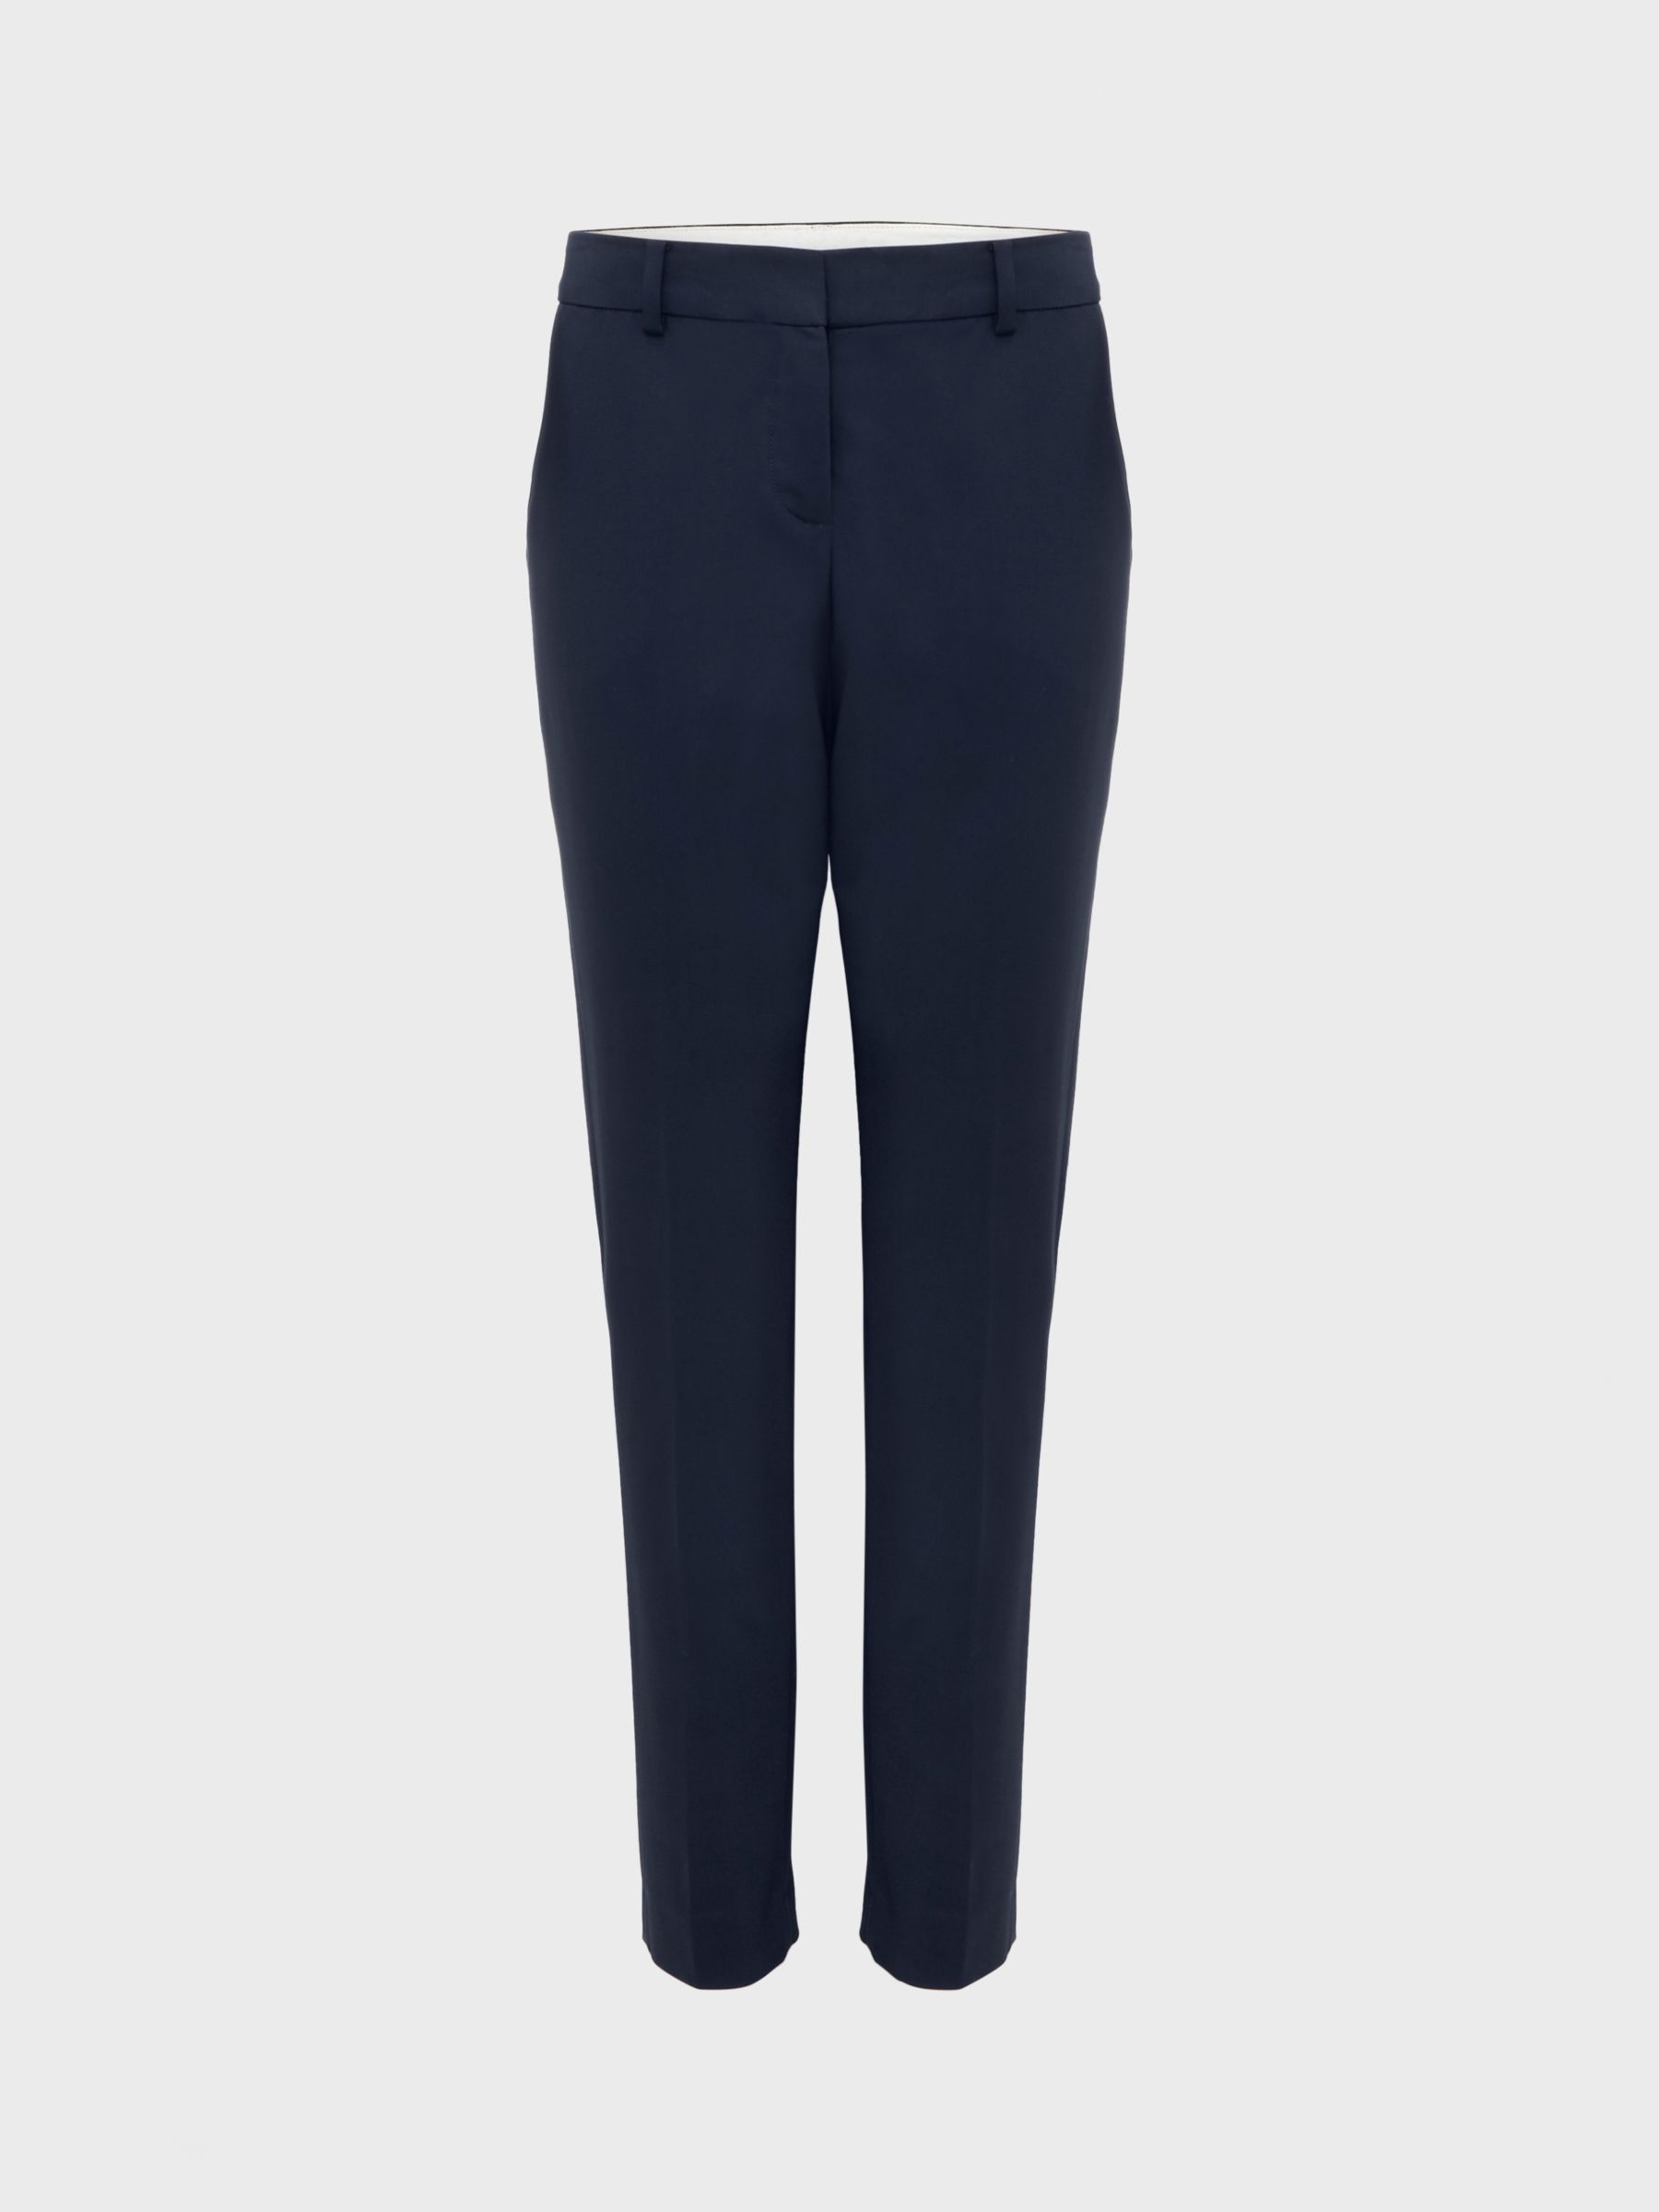 Hobbs Quin Cotton Blend Trousers, Navy at John Lewis & Partners